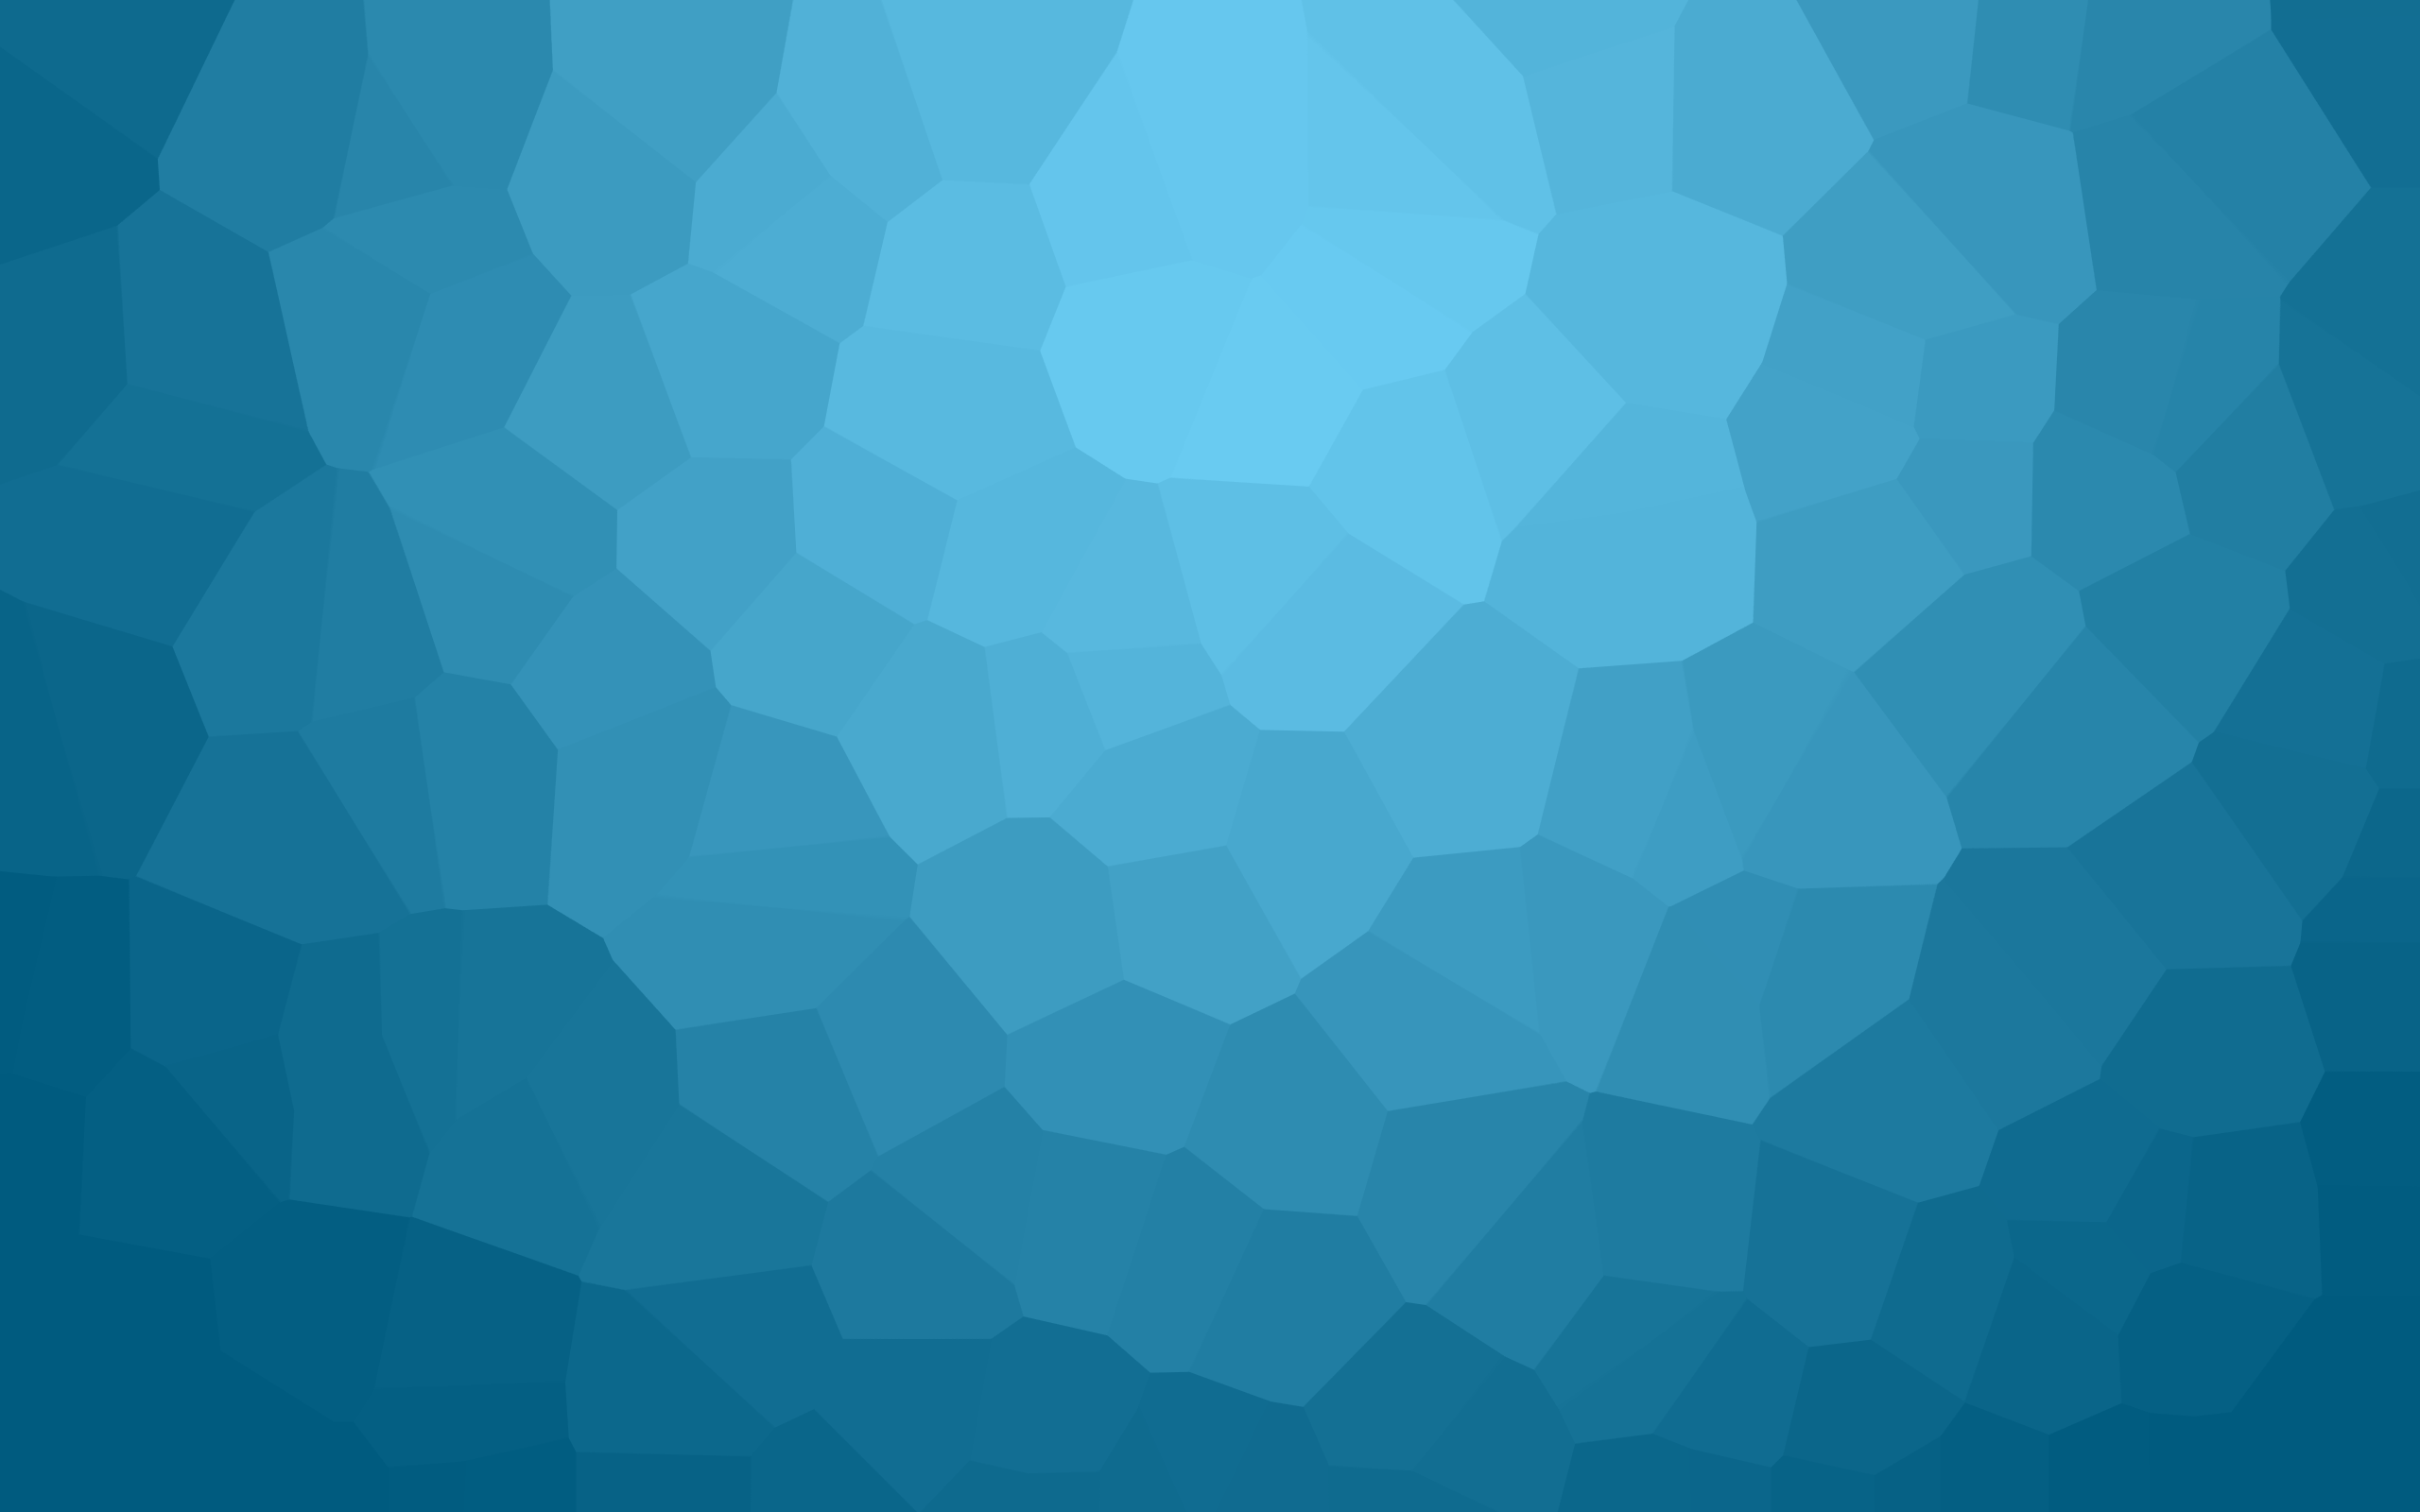 General 2560x1600 minimalism abstract low poly gradient blue cyan